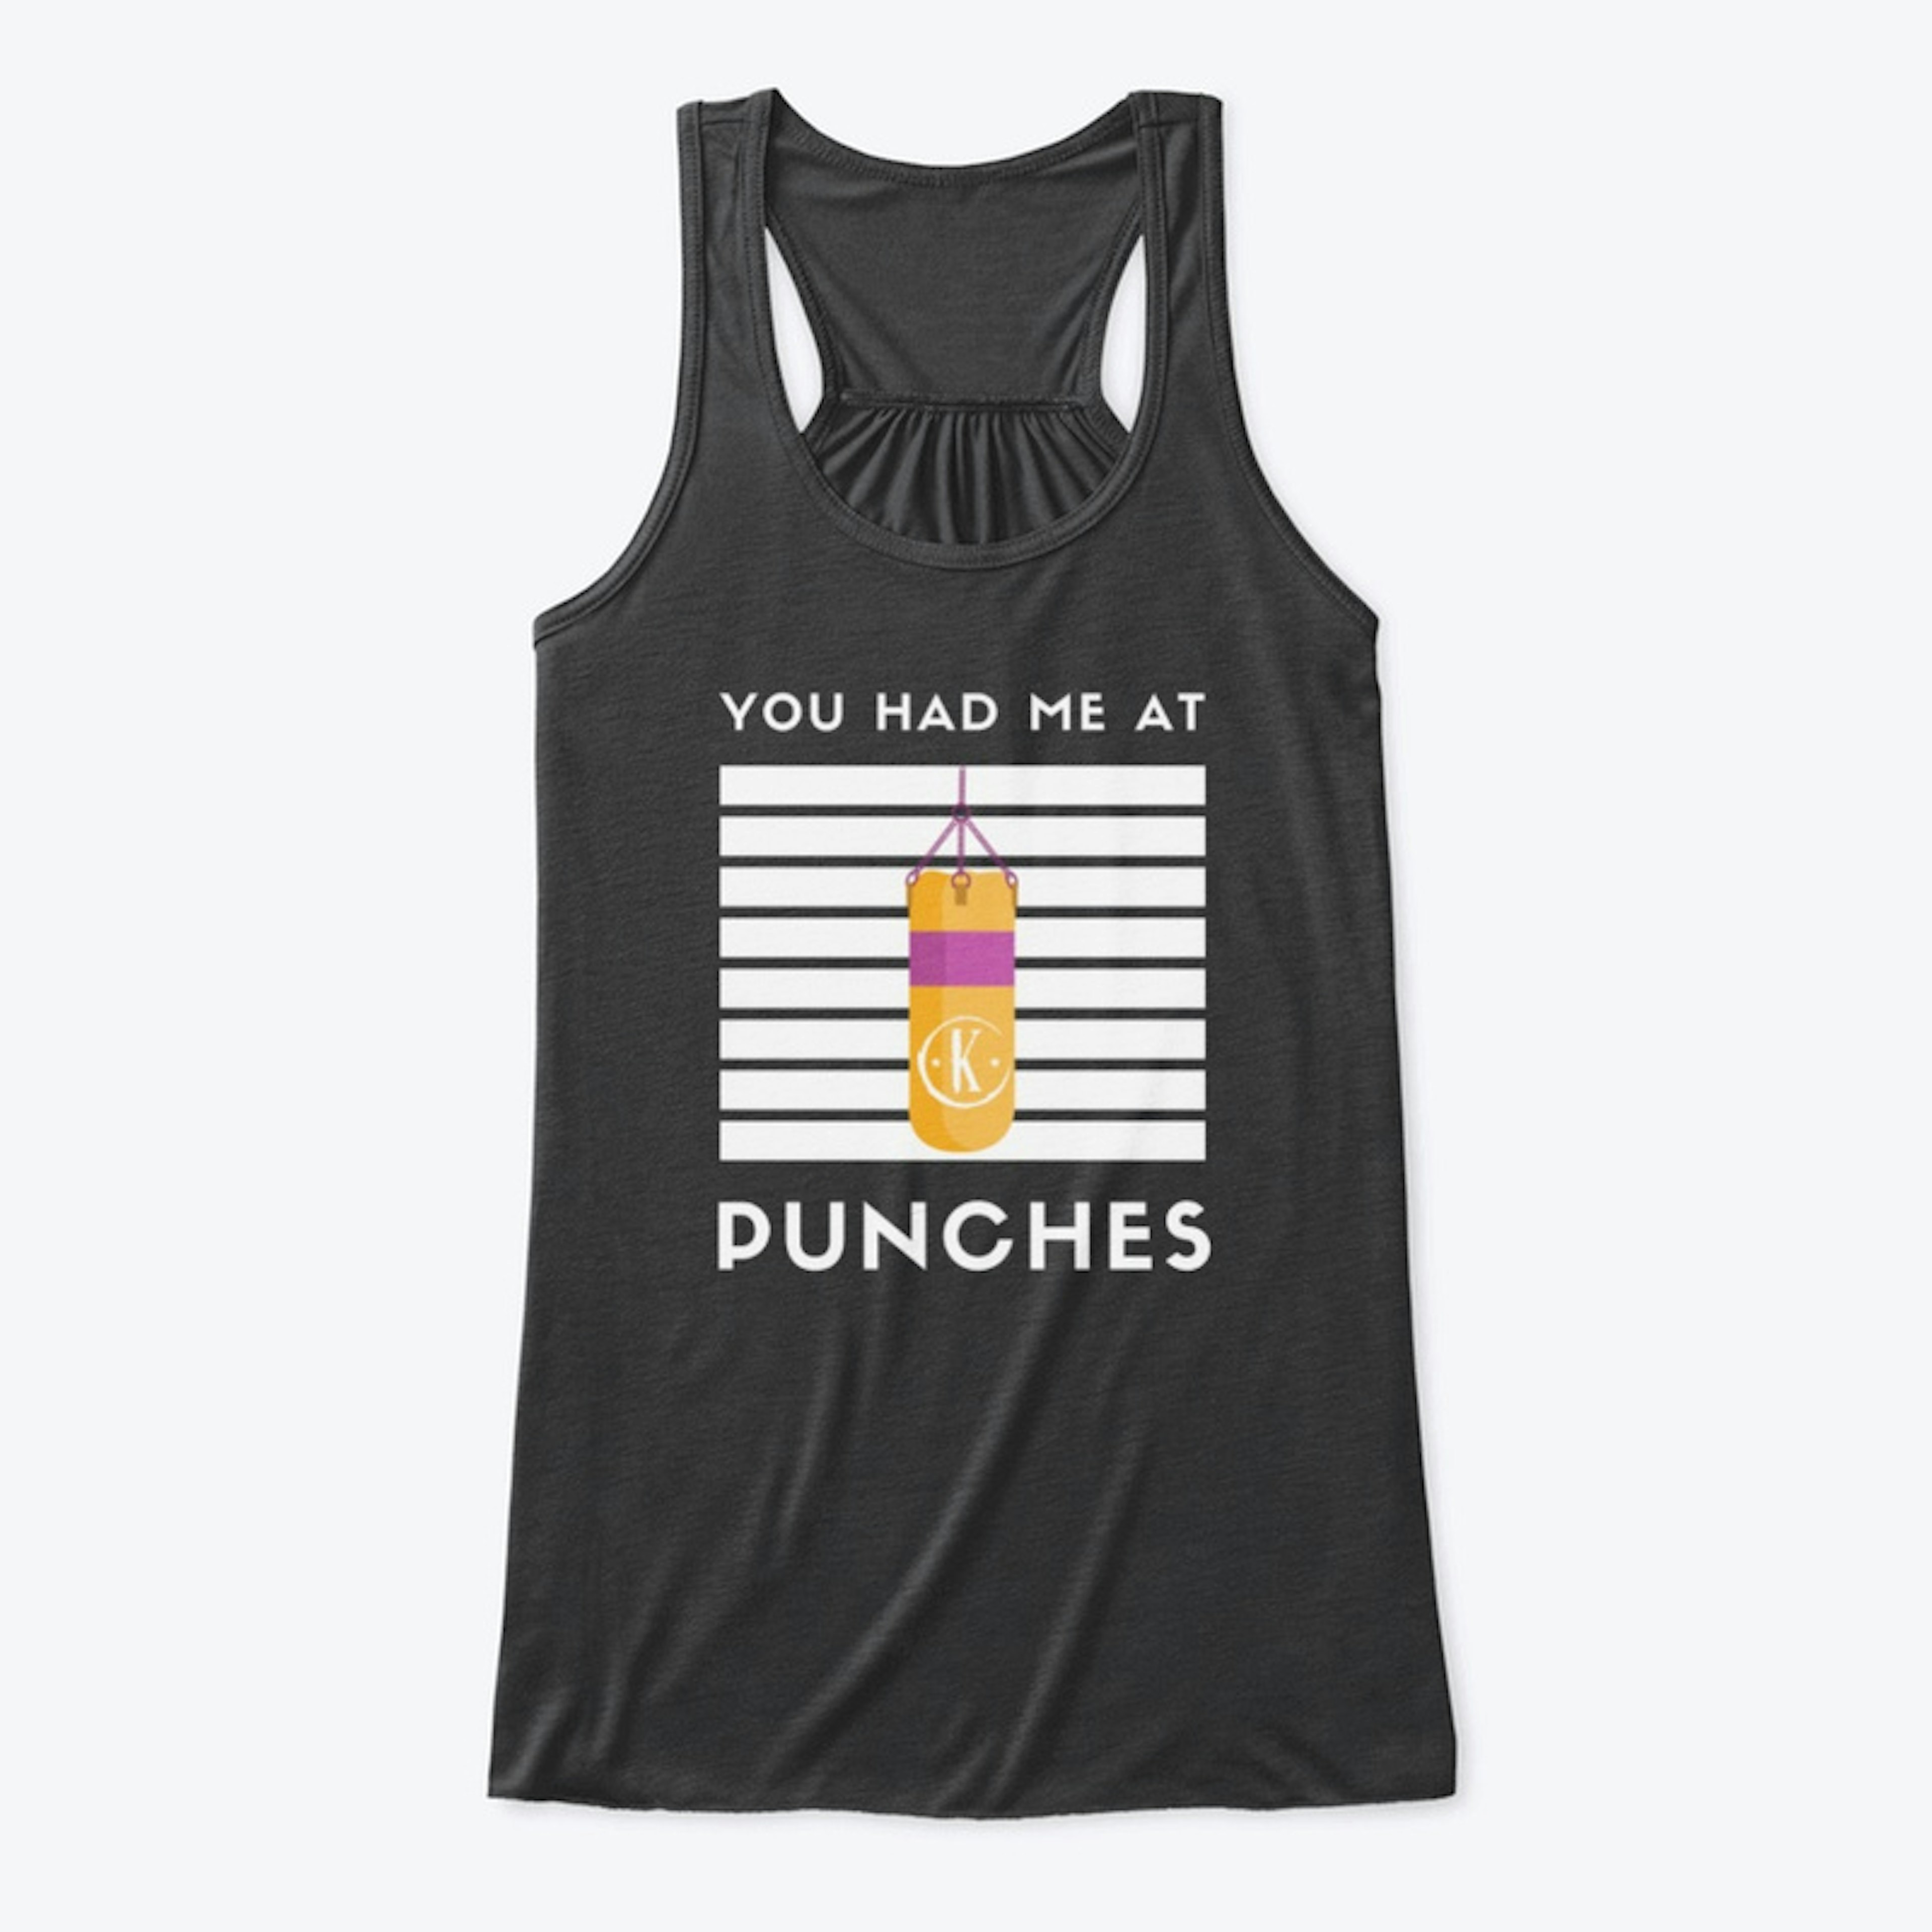 You Had Me At Punches... (Black or Navy)